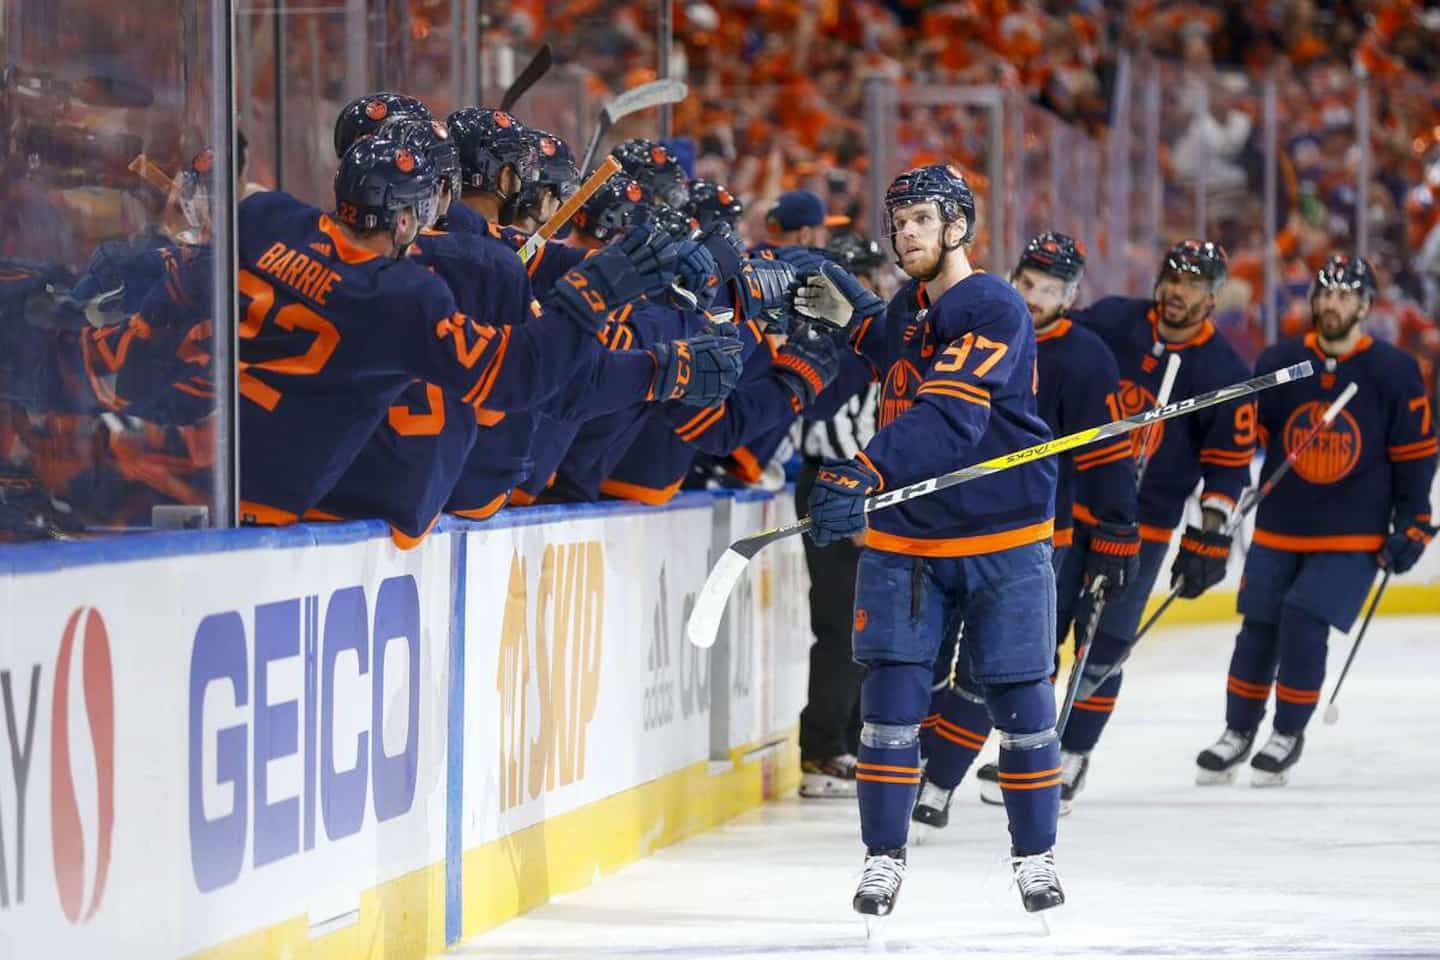 “Another level to reach” for McDavid and the Oilers